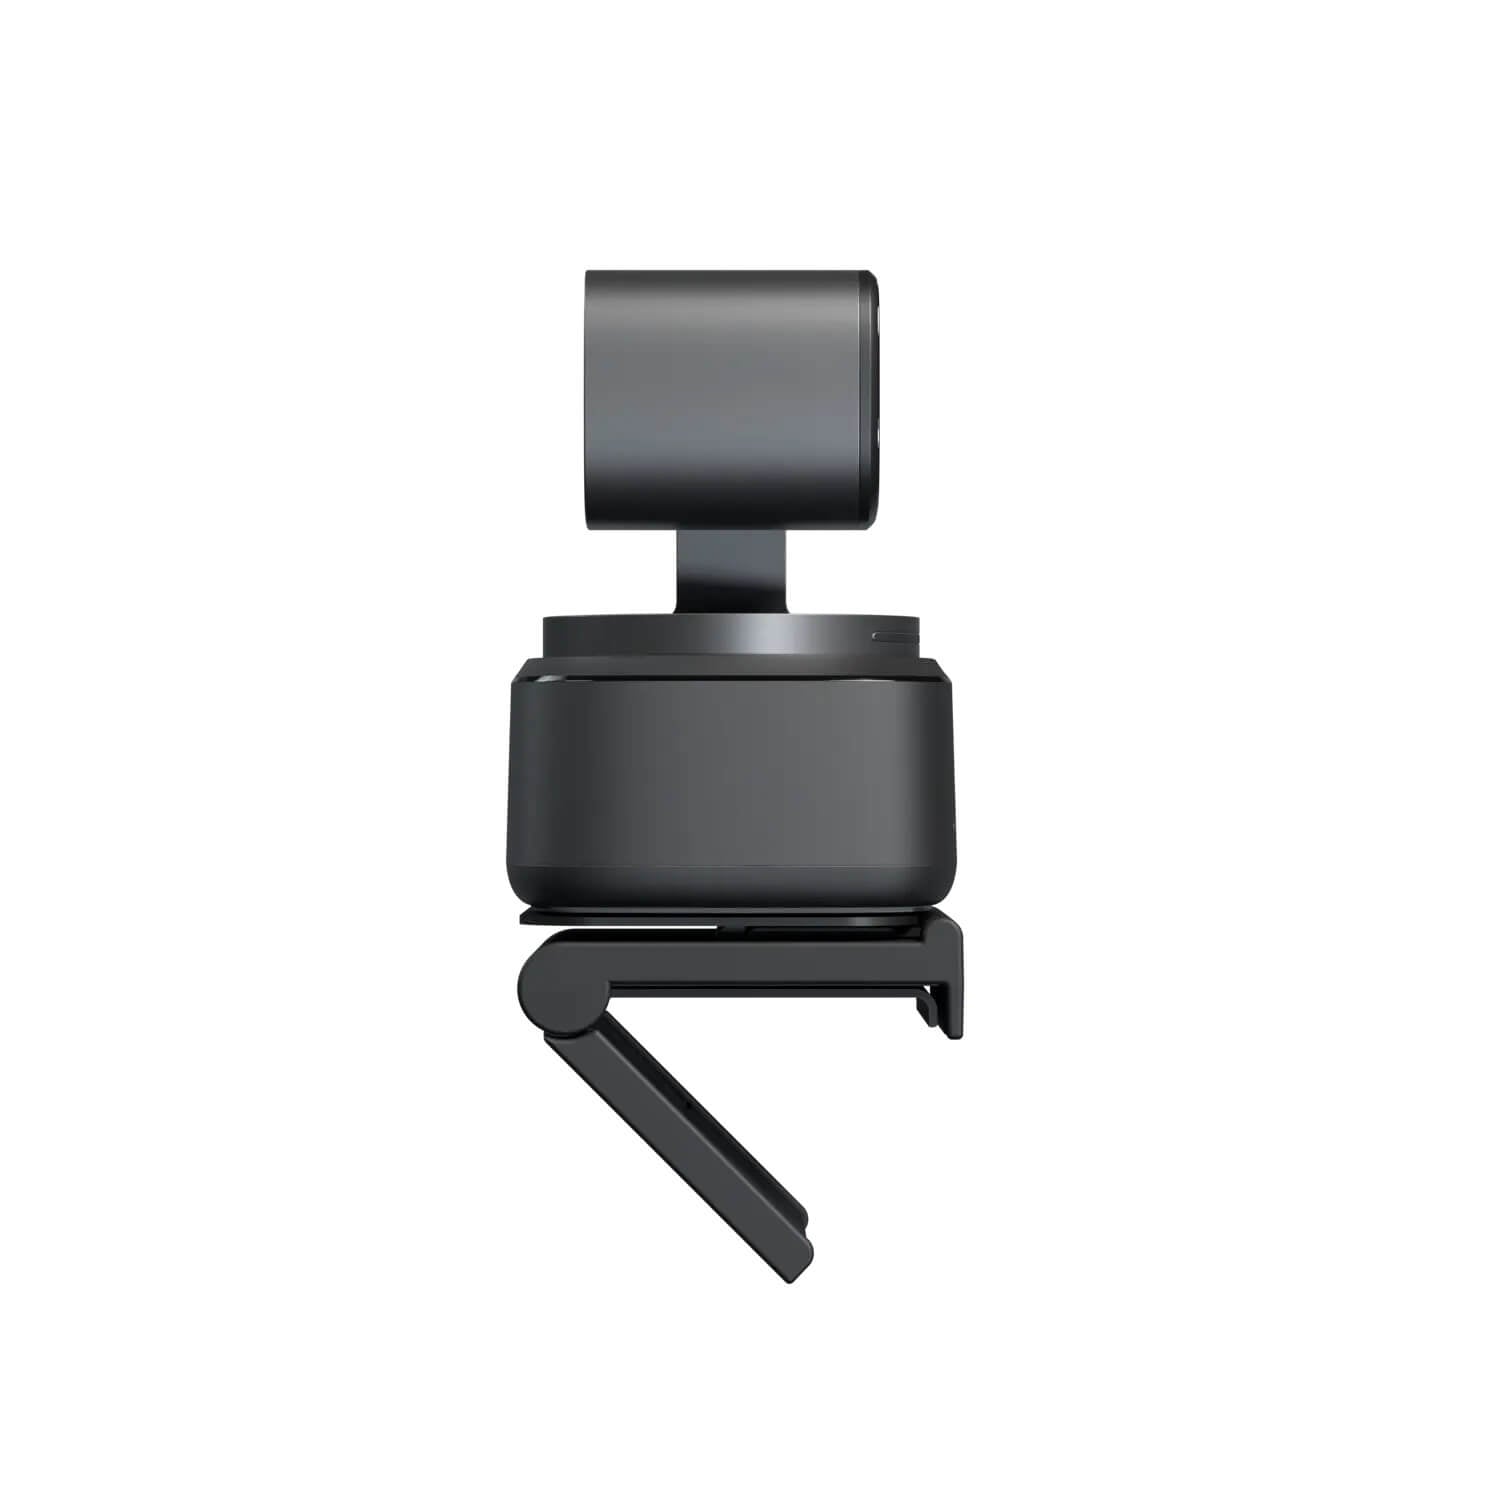 OBSBOT OAB-2209-CT - Tiny 2 Adjustable Mount for Tiny 2 Webcams, side view shown with optional webcam